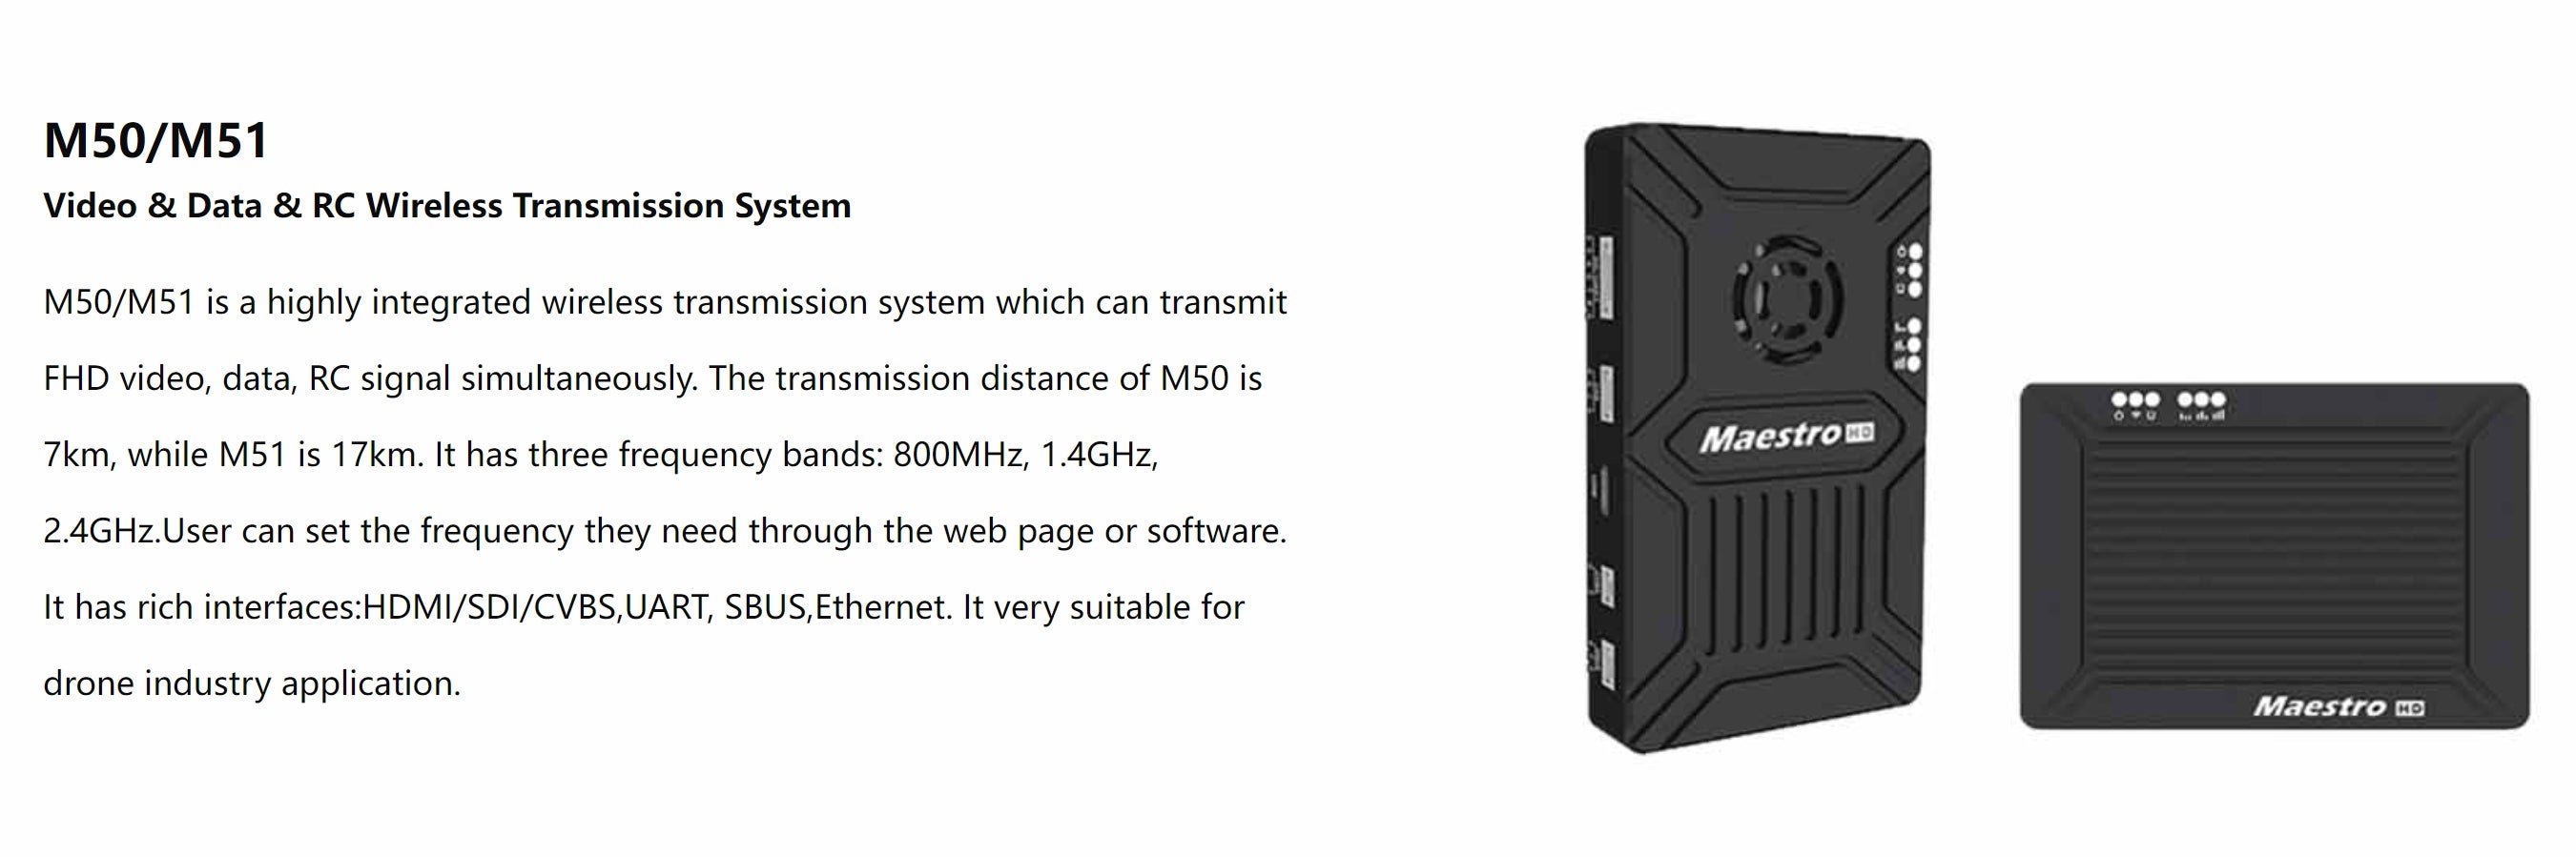 Maestro M50/M51, Wireless transmission system transmitting video, data, and RC signals up to 7km (M50) or 17km (M51).